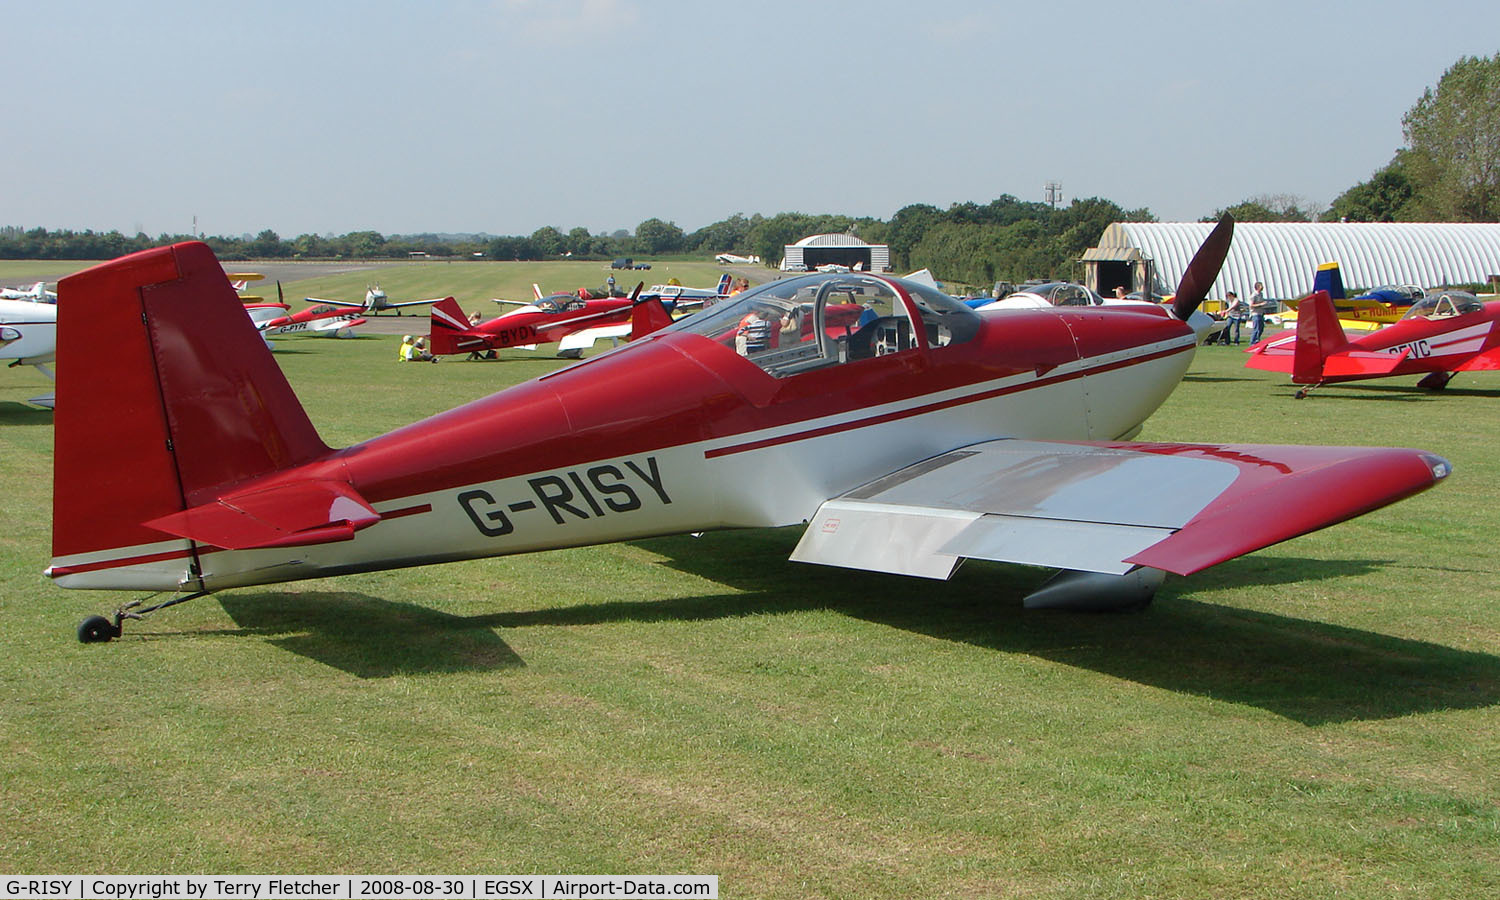 G-RISY, 2008 Vans RV-7 C/N PFA 323-14320, Participant in the 2008 RV Fly-in at North Weald Uk